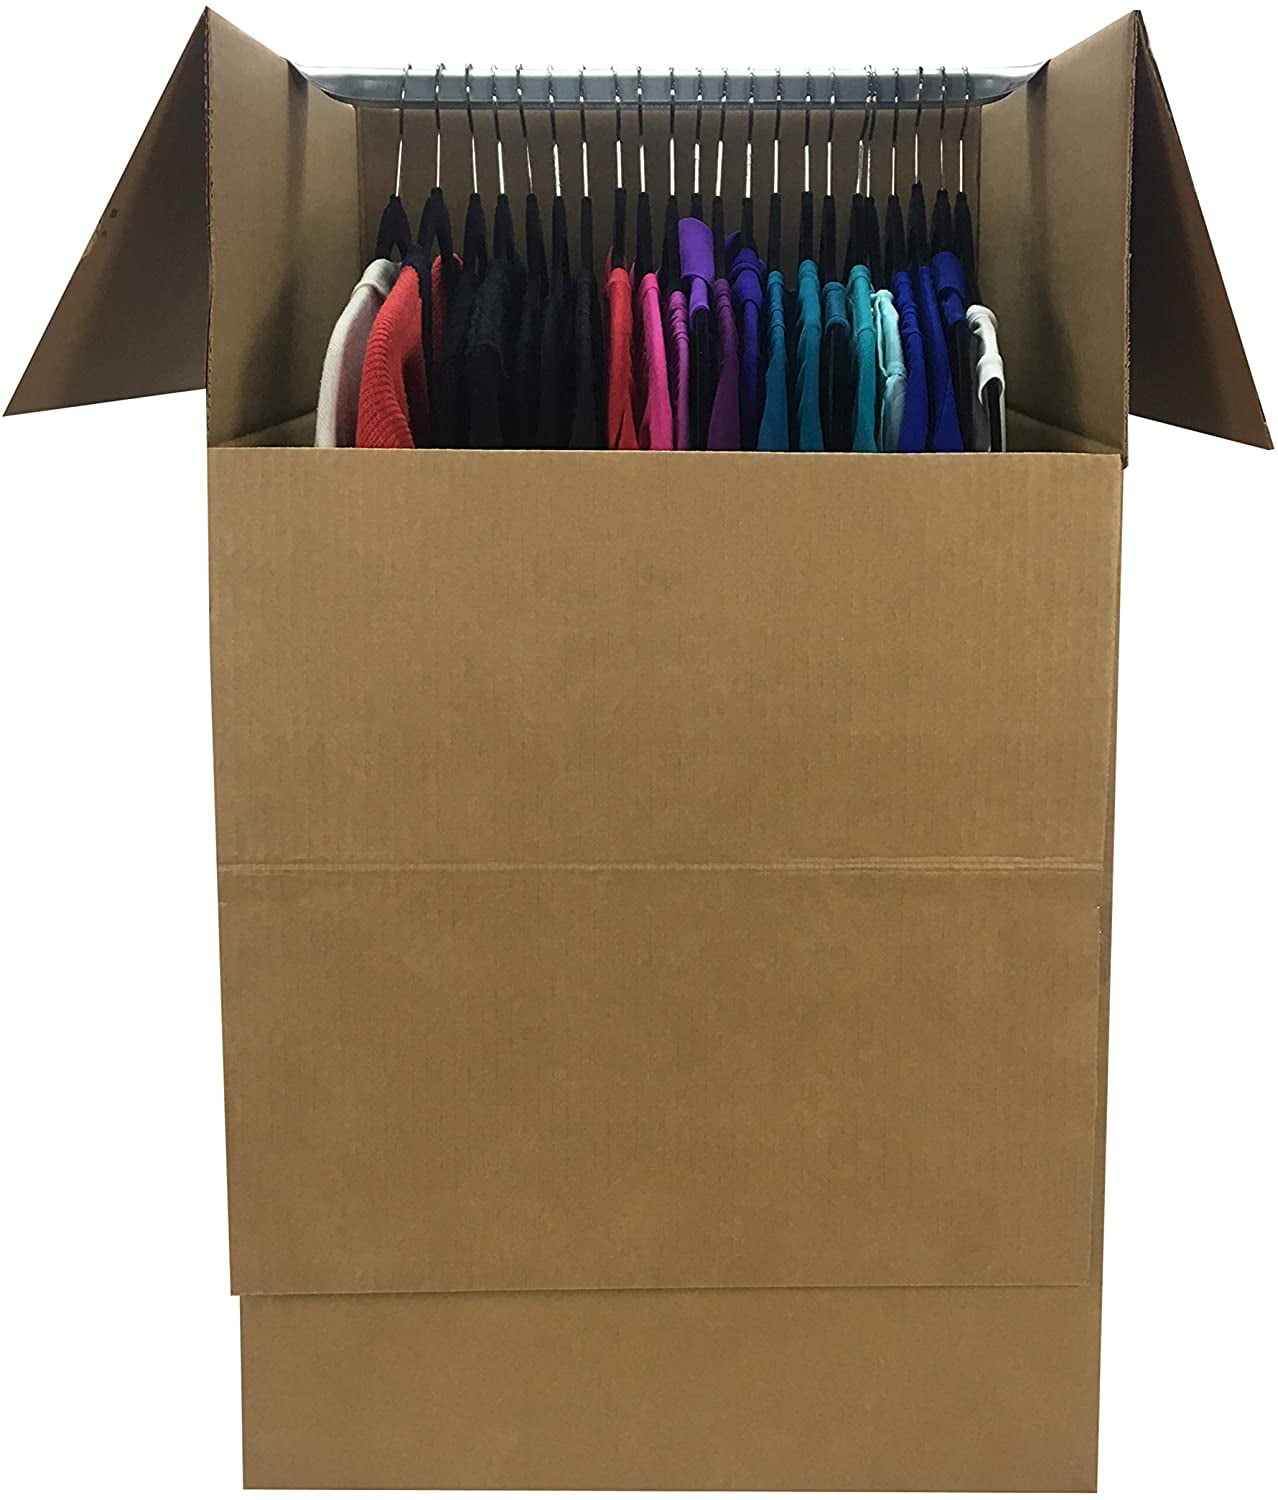 uBoxes Wardrobe Boxes - Qty: 6 Boxes w Bars - Moving Boxes Fast Free